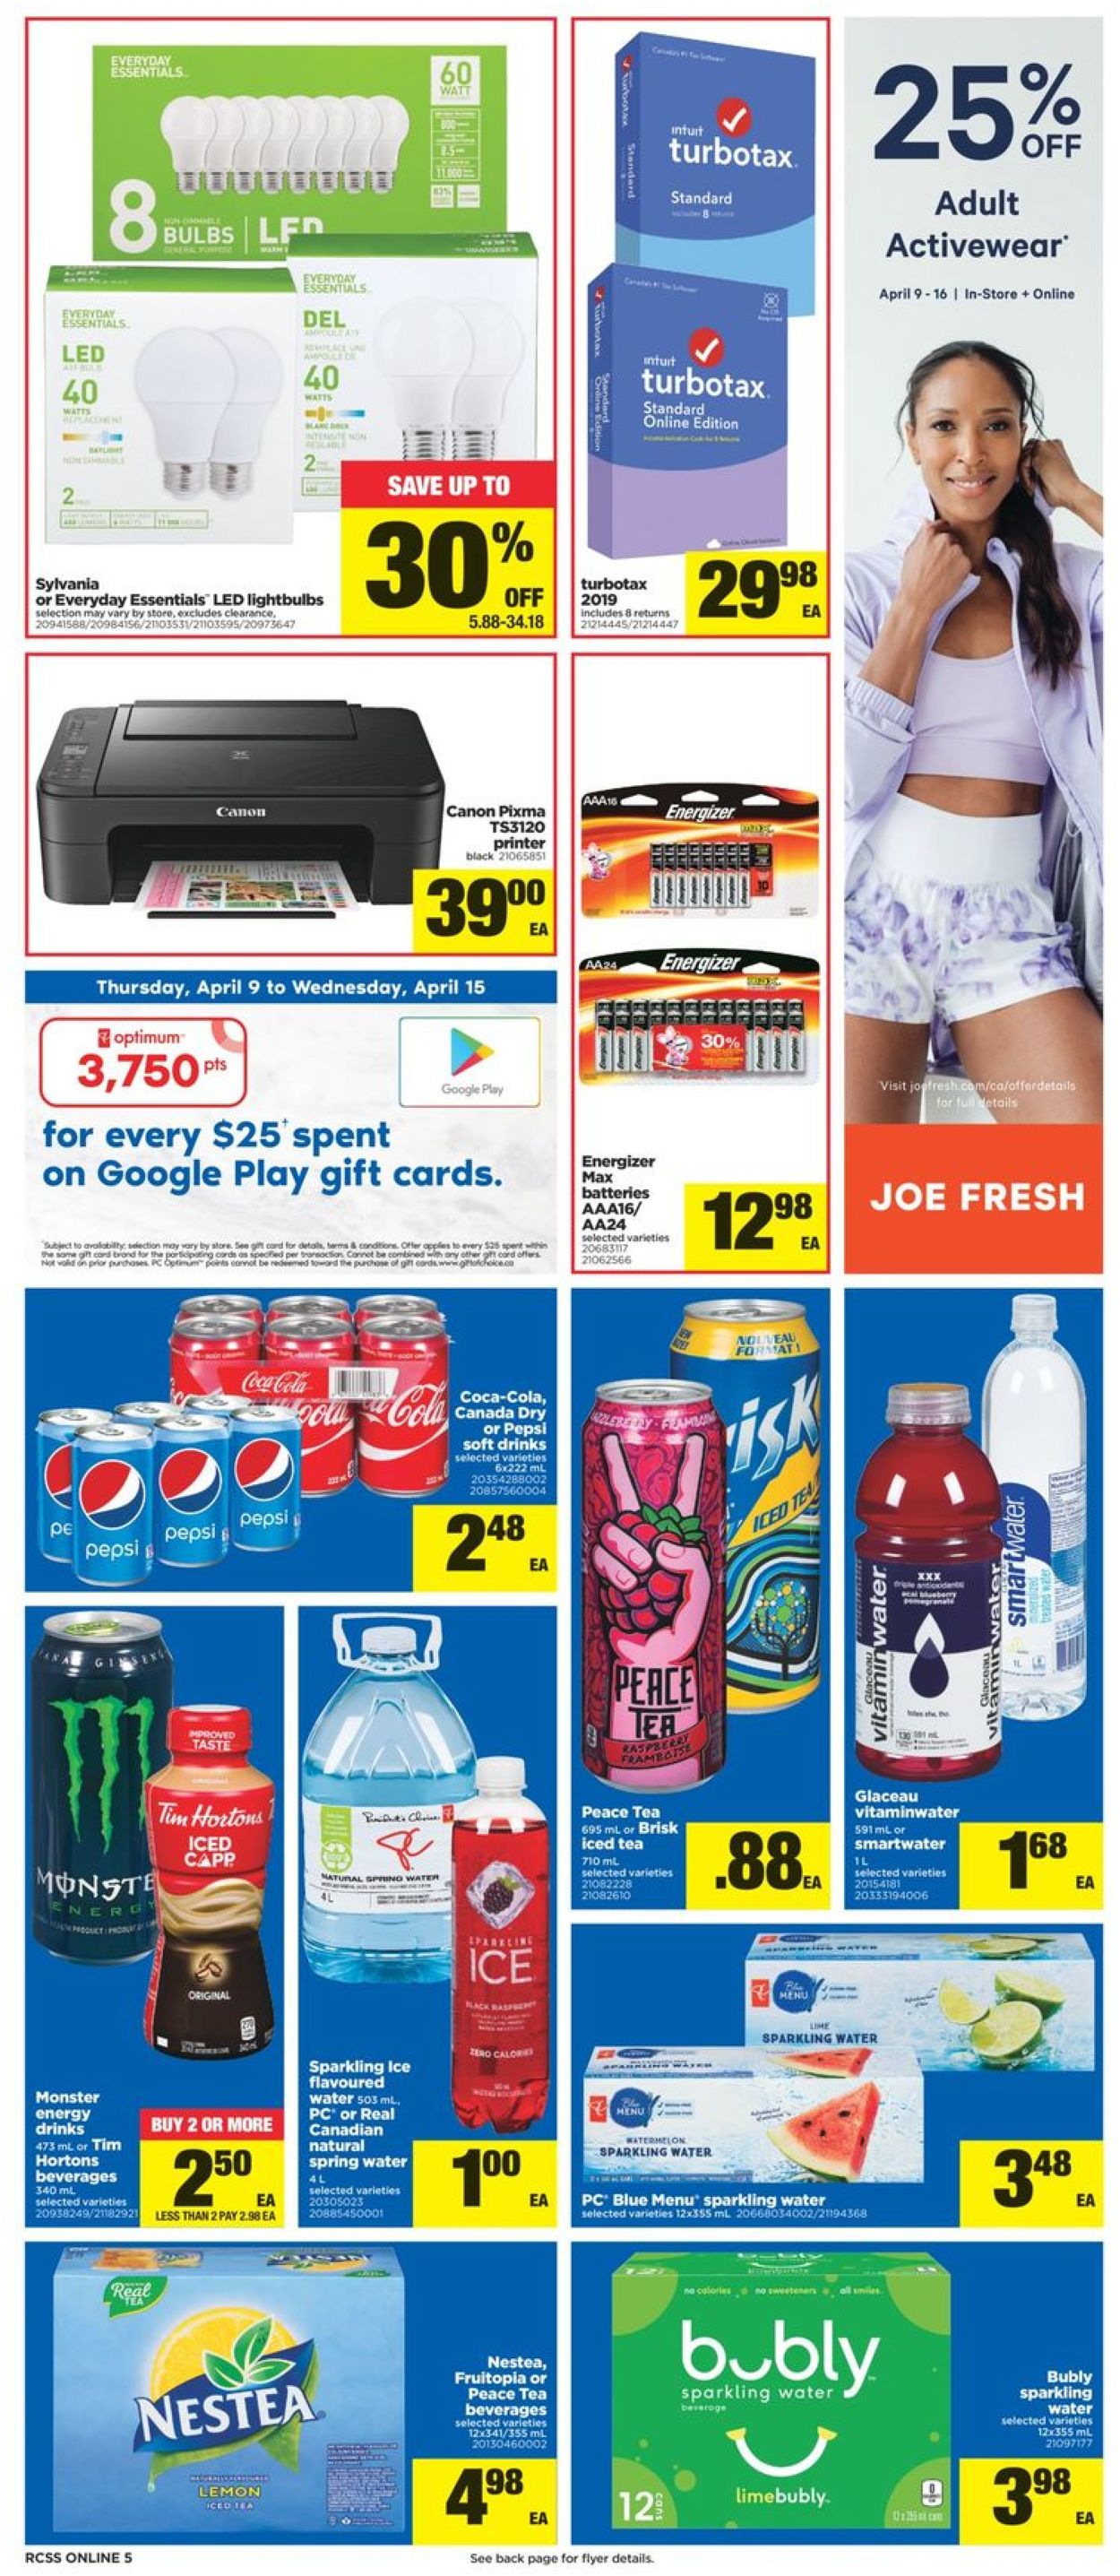 Real Canadian Superstore Flyer from 04/09/2020